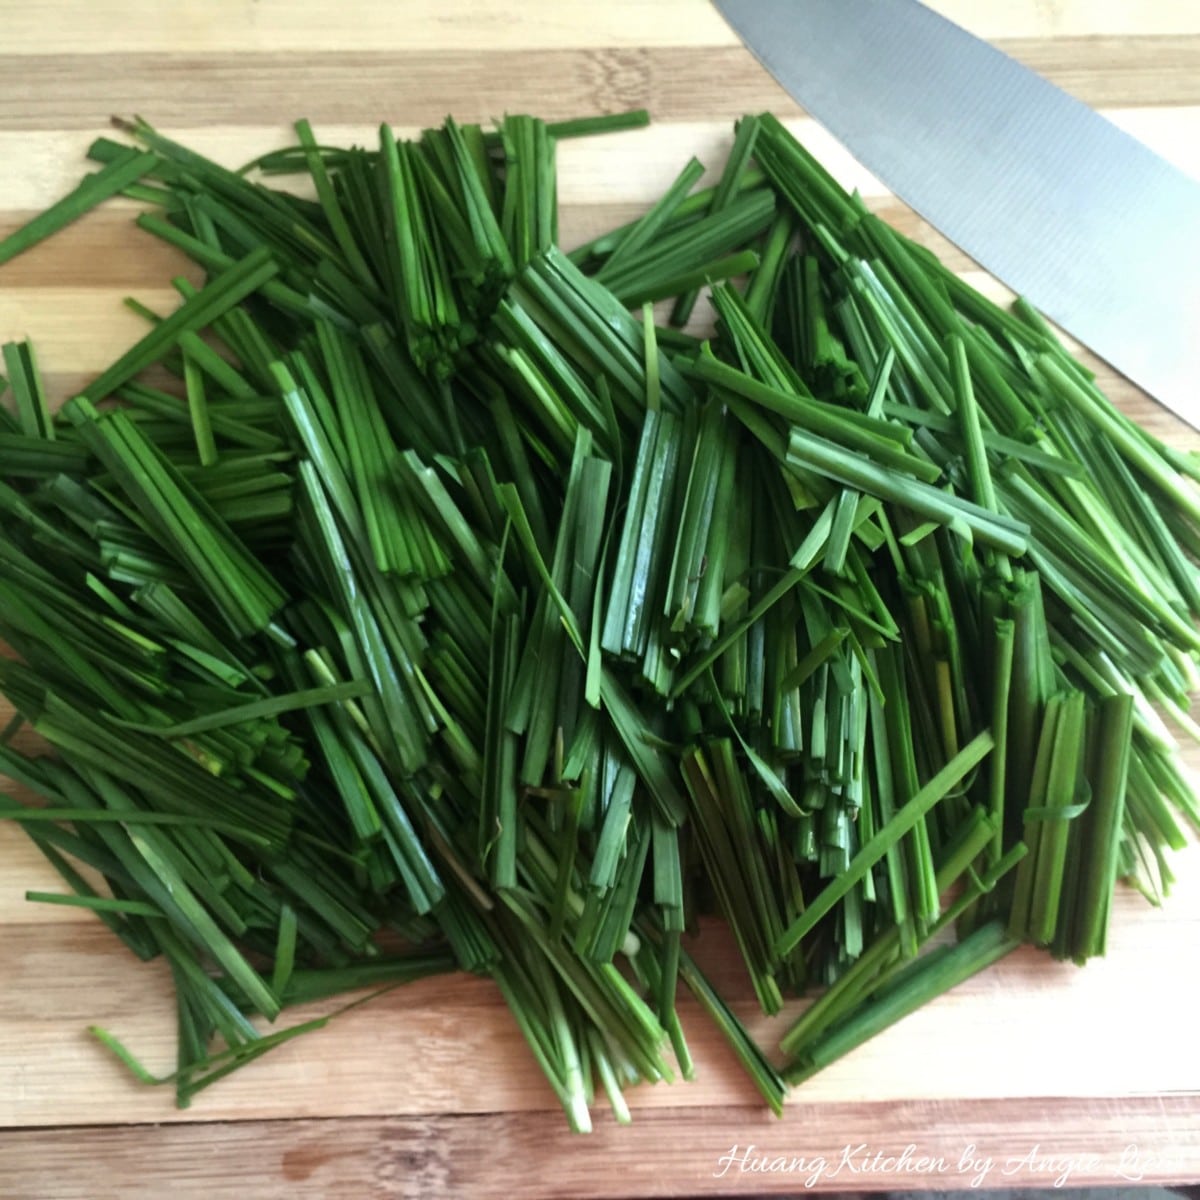 Rinse and cut chives.